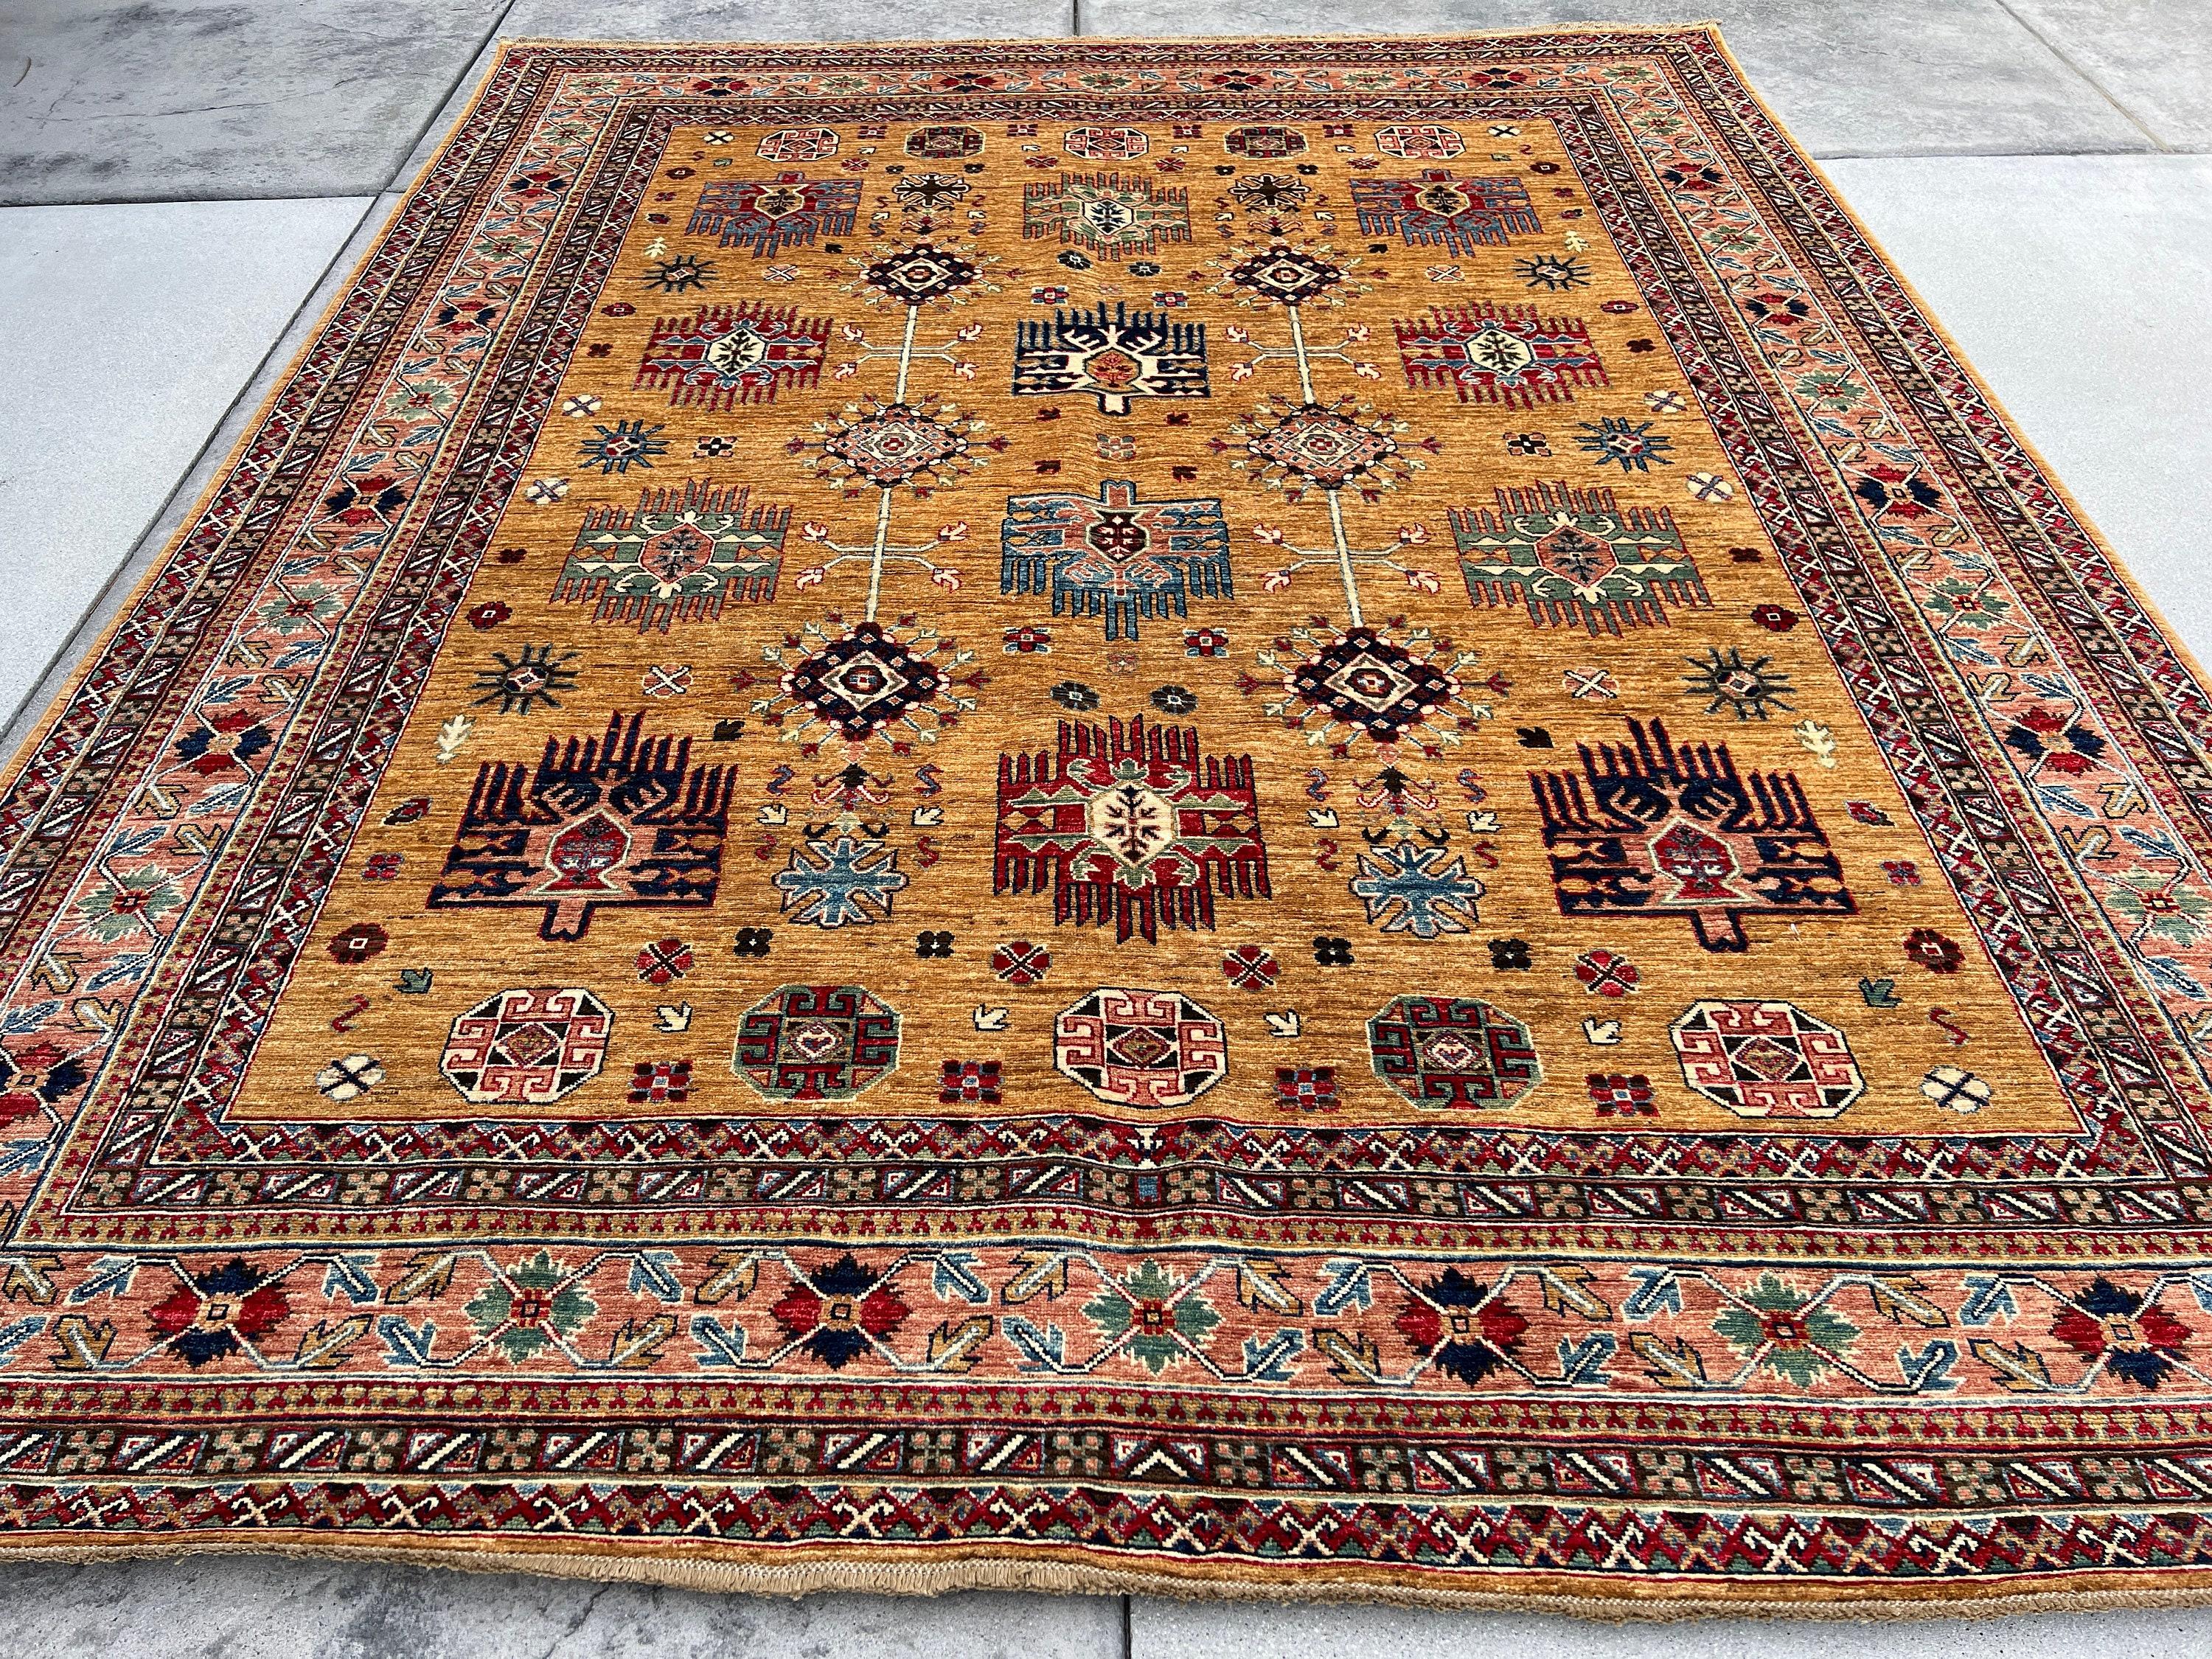 This rug was made with 100% premium, Afghan-sourced Ghazni wool with a cotton foundation. The rich colors are dipped in natural dyes to create an heirloom finish that does not bleed and is meant to last for generations. Sourced through fair trade